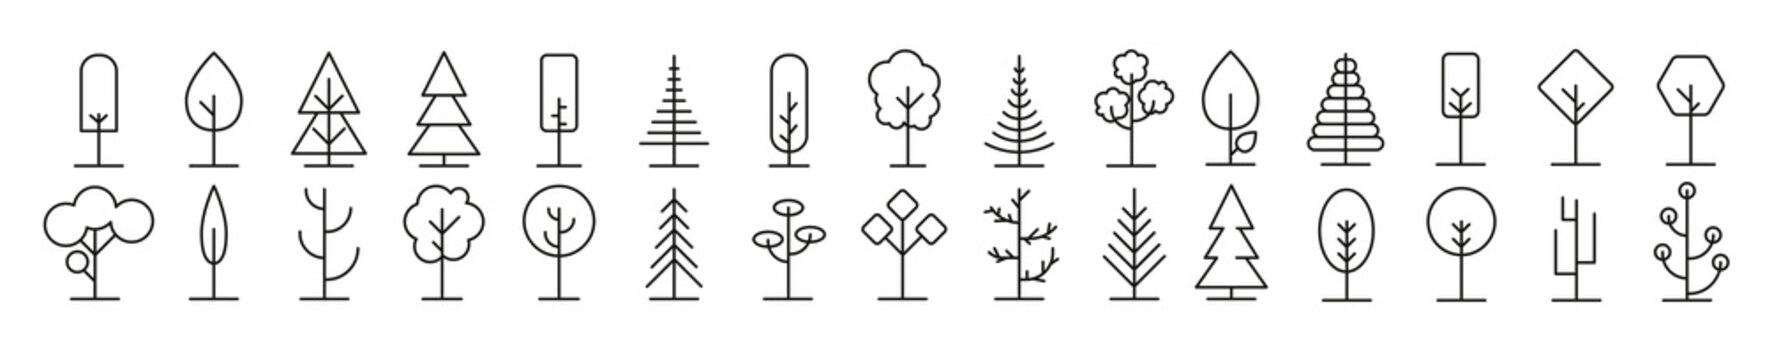 Tree icons and forest line icon. Vector illustration